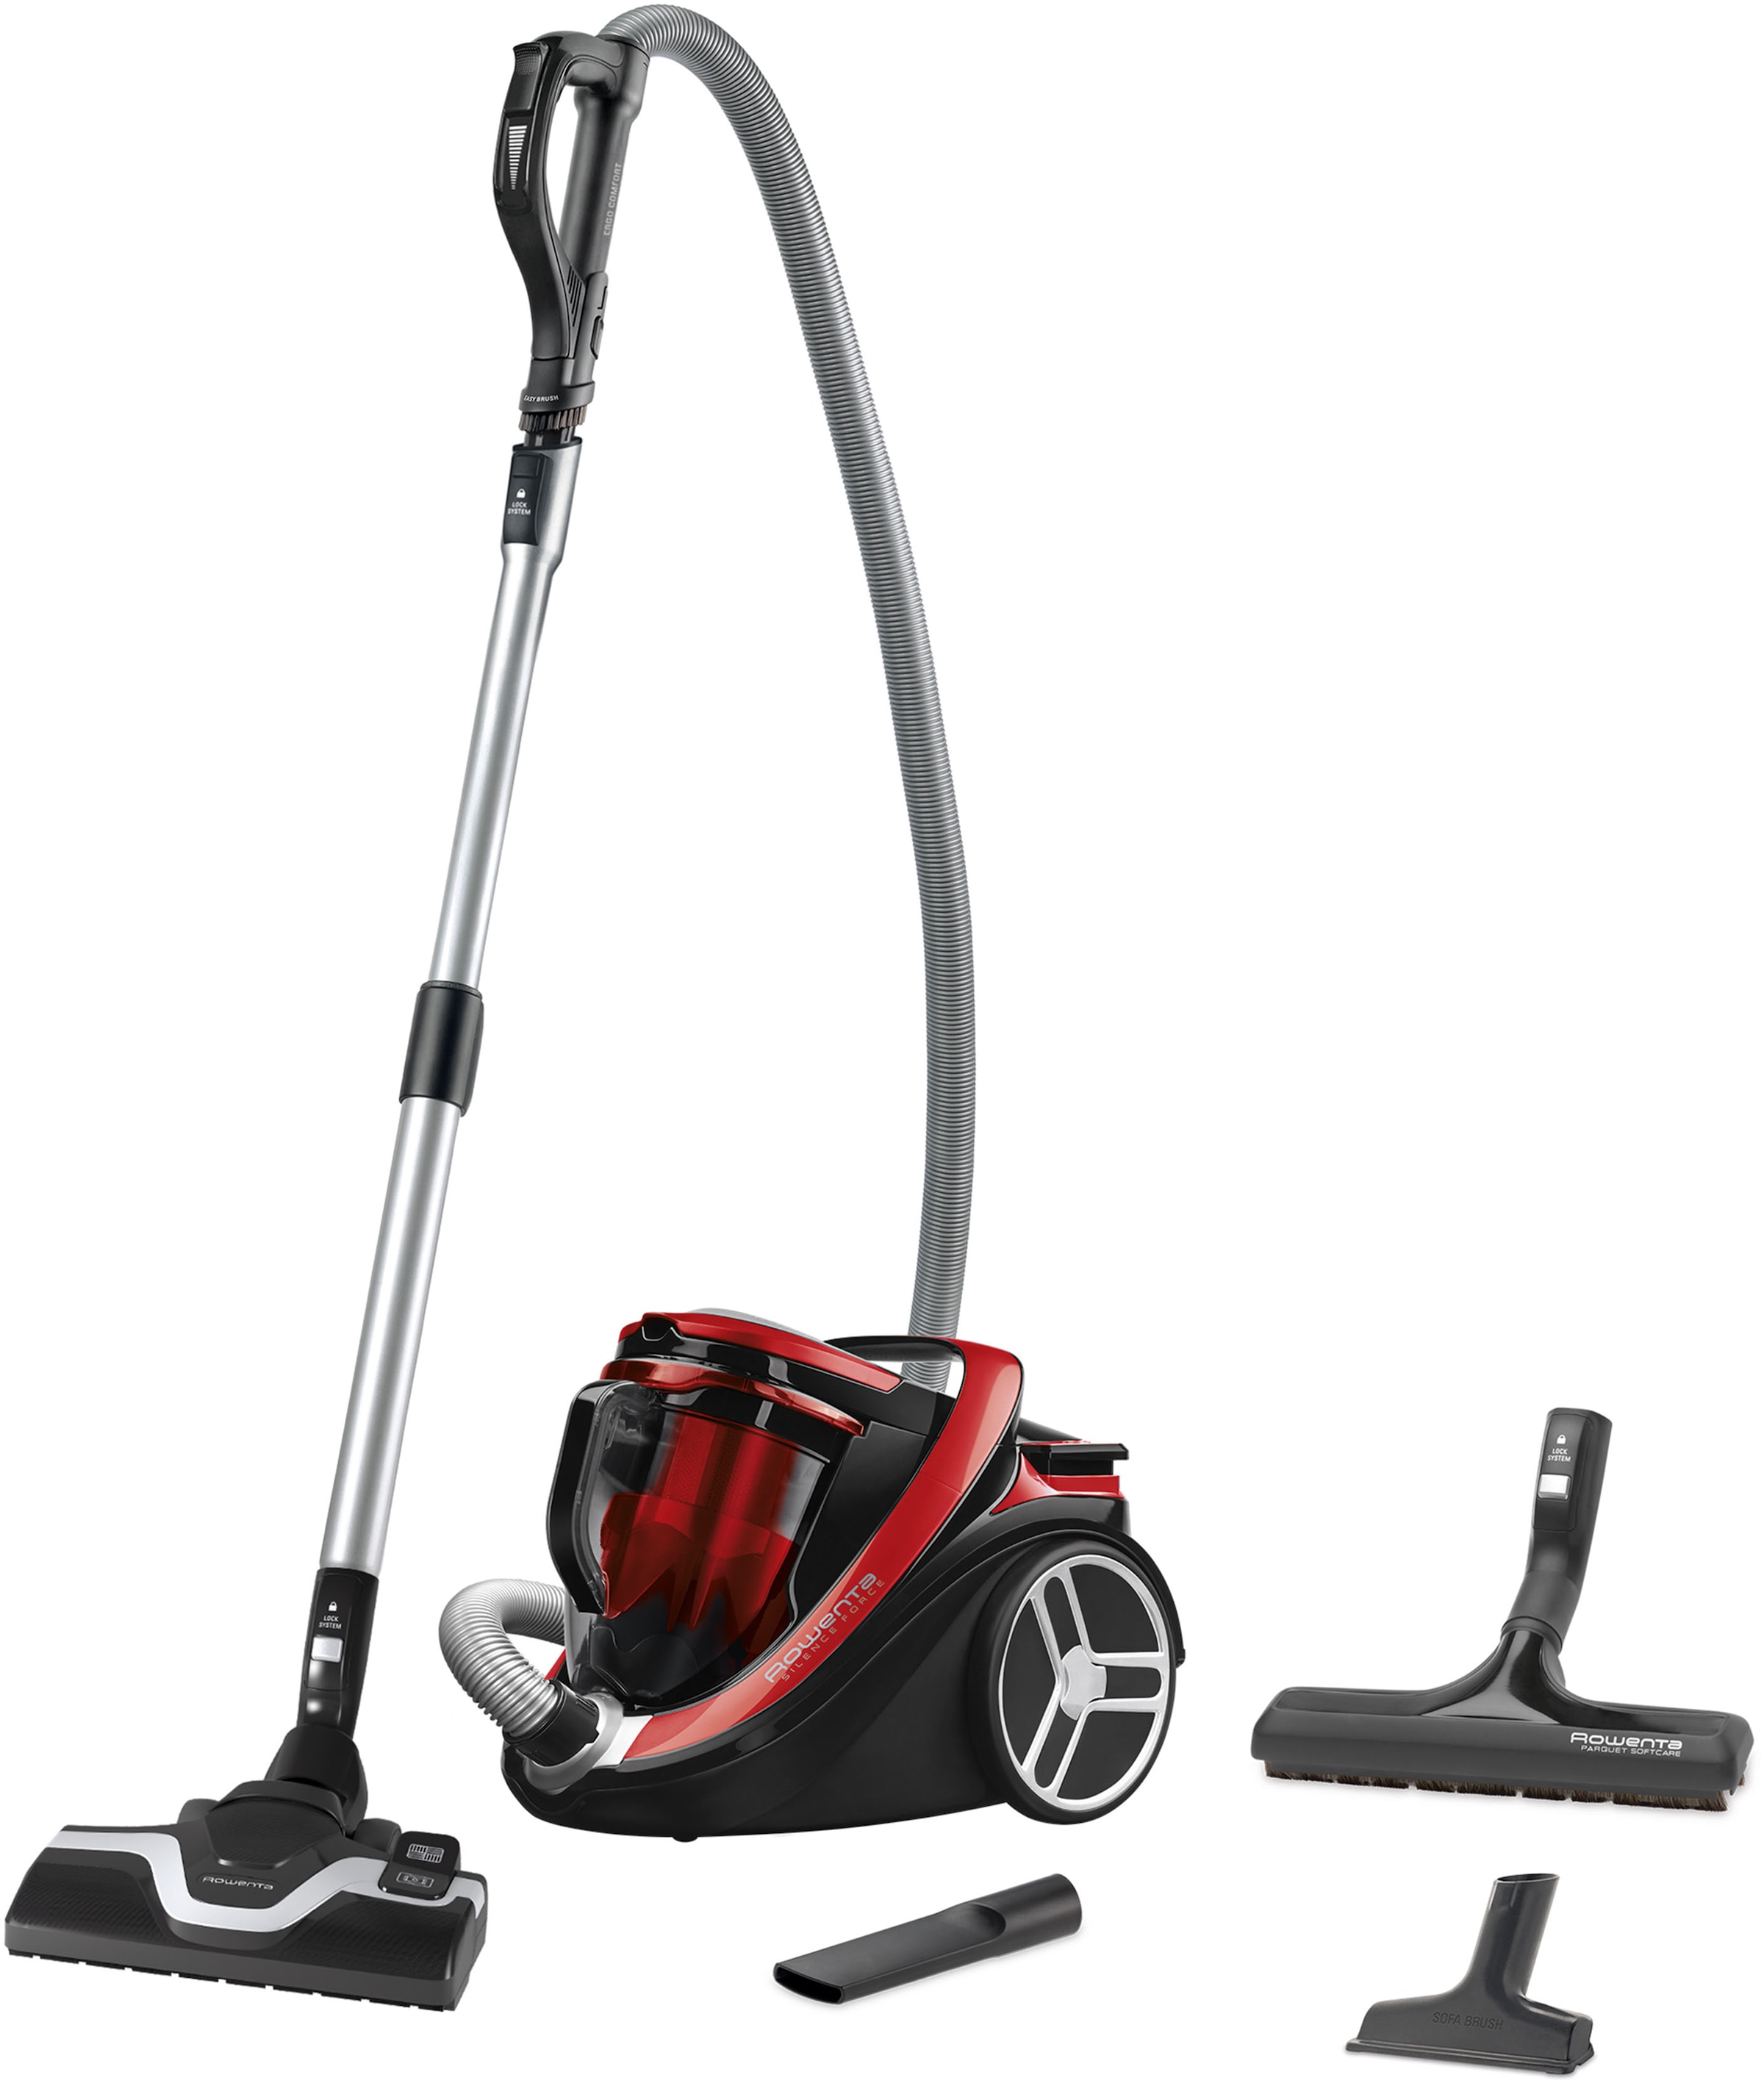 Bodenstaubsauger »RO7649 Silence Force Cyclonic«, 550 W, beutellos, Vacuum-Cleaner;...